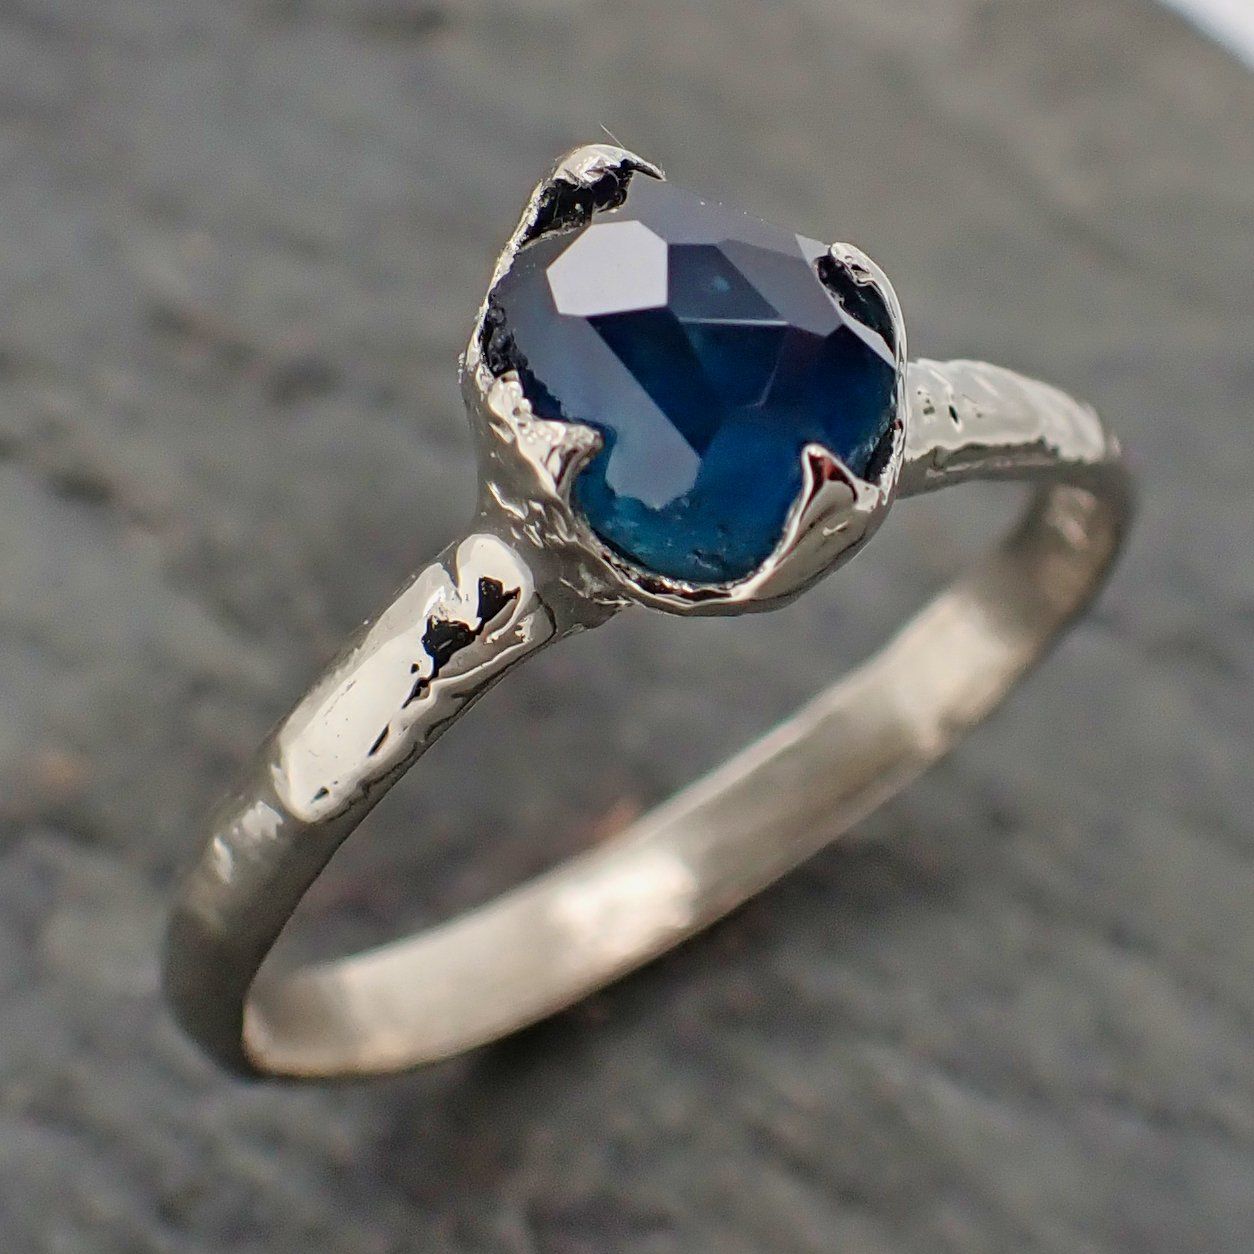 partially faceted blue montana sapphire solitaire 18k white gold engagement ring wedding ring one of a kind gemstone ring 2195 Alternative Engagement